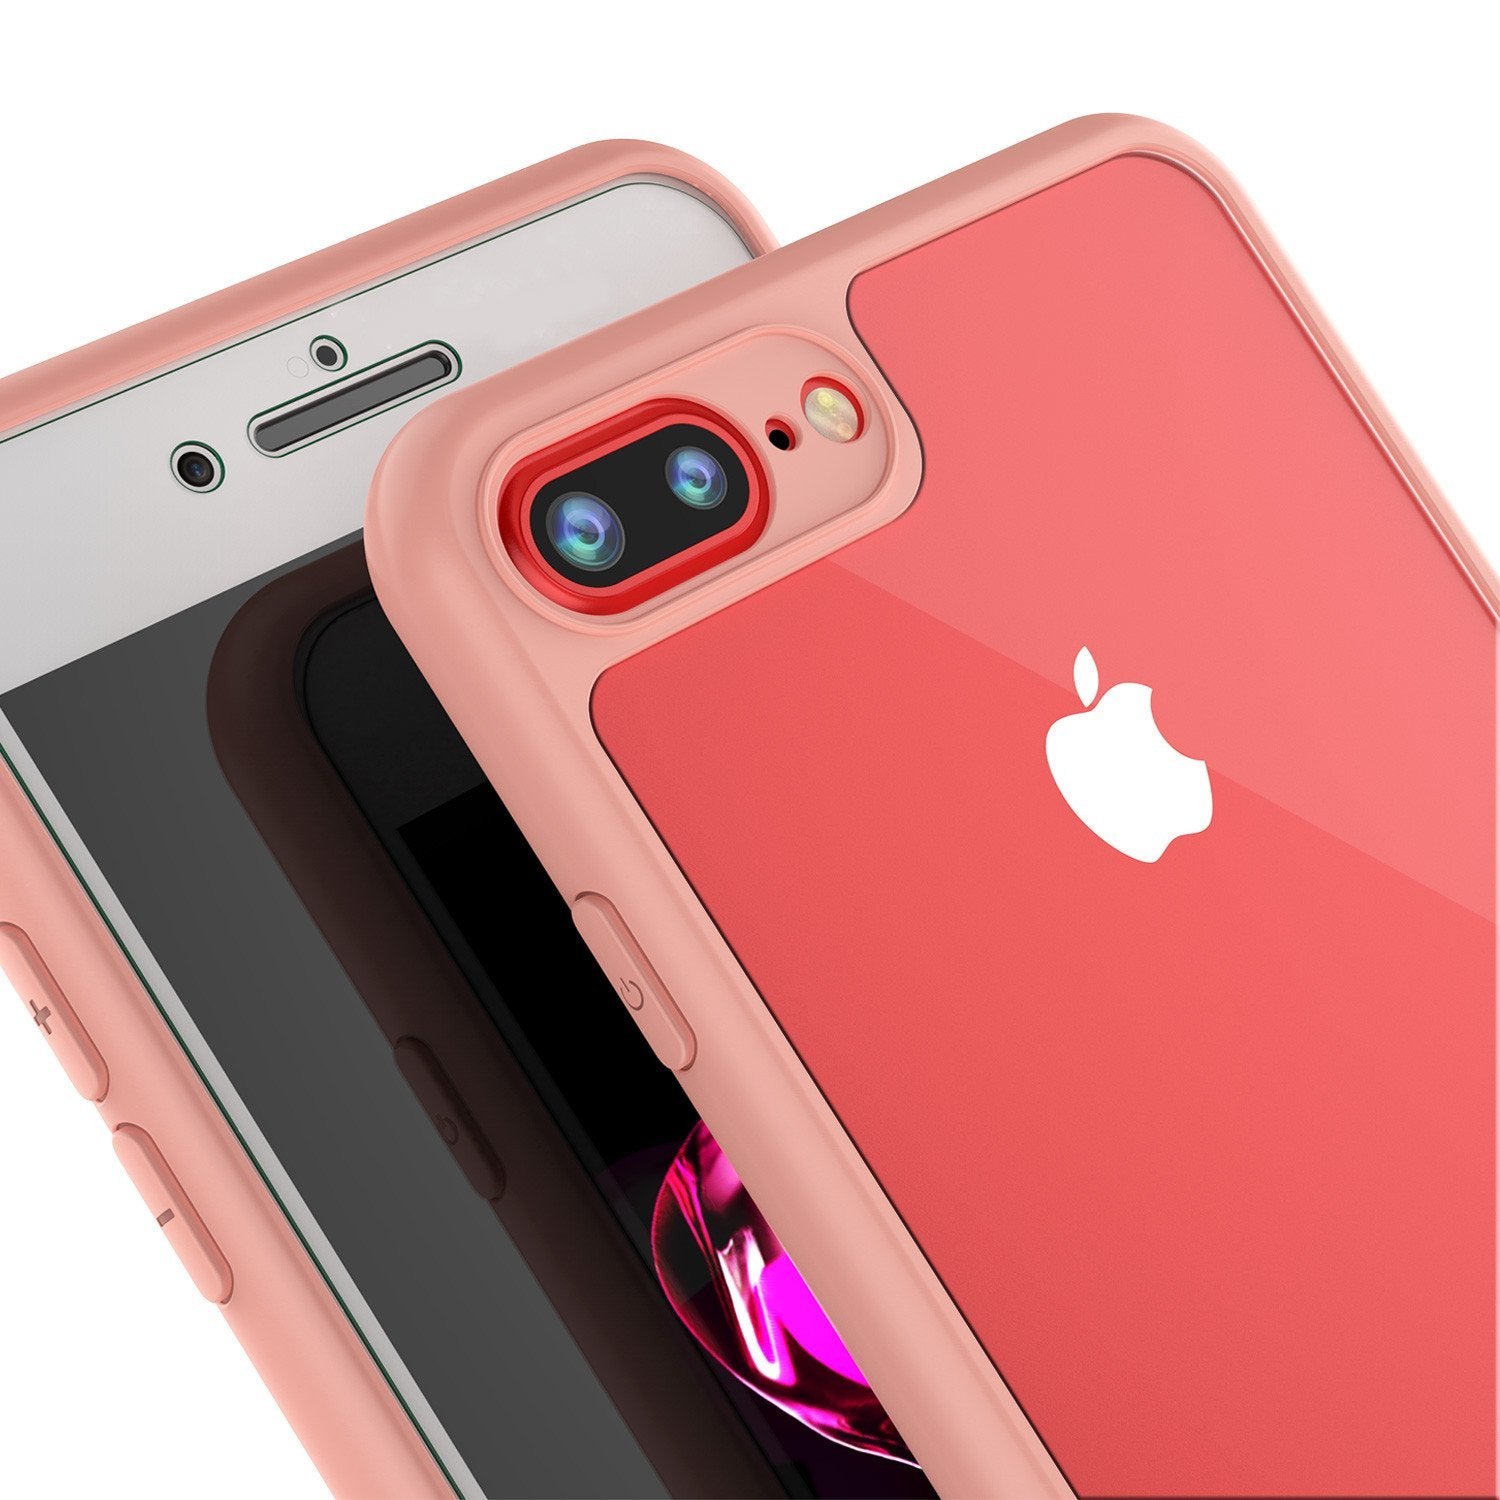 iPhone 8+ Plus Case [MASK Series] [PINK] Full Body Hybrid Dual Layer TPU Cover W/ protective Tempered Glass Screen Protector